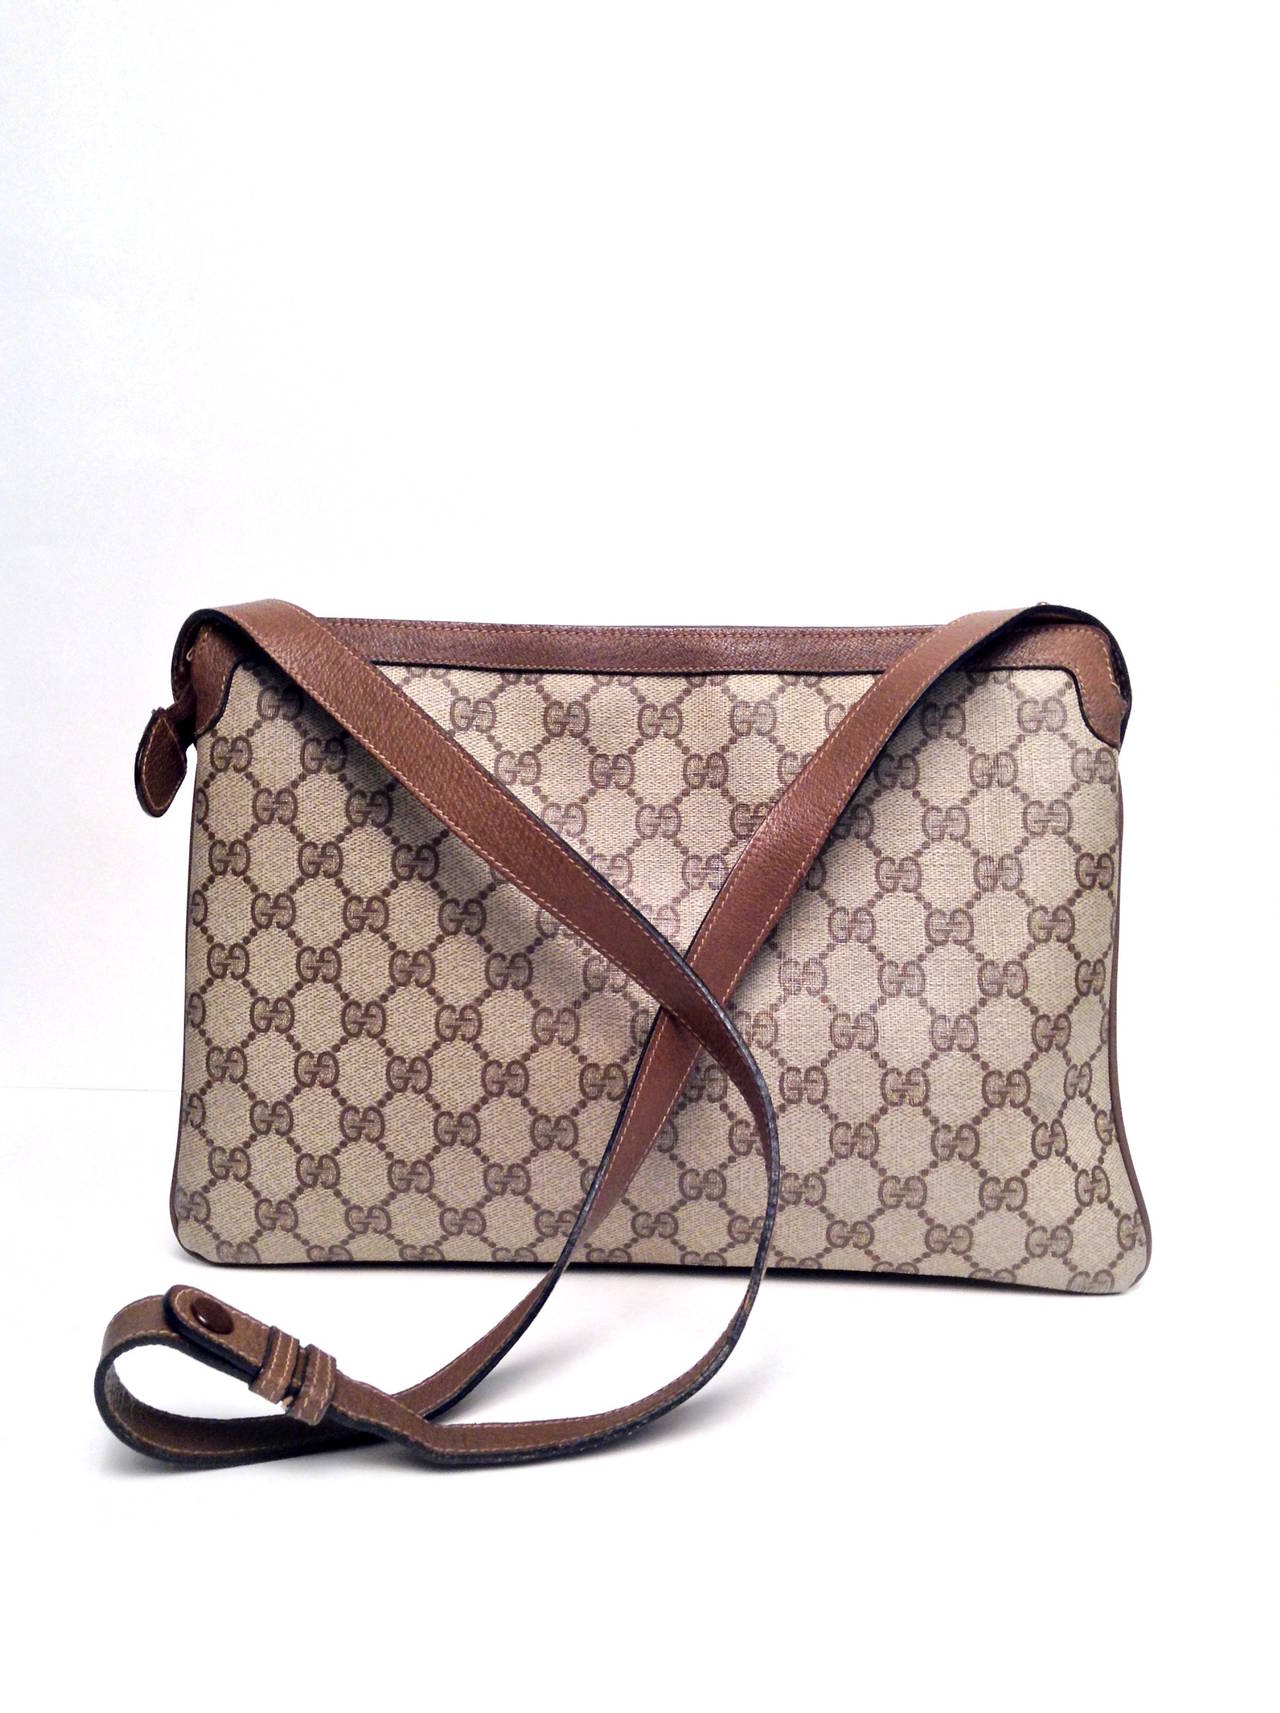 A classic and versatile bag to add to your collection. Exterior features light brown waxed classic monogram canvas with a classic Gucci stripe on the front. One exterior slip pocket sit at the front of the bag. Interior features three compartments